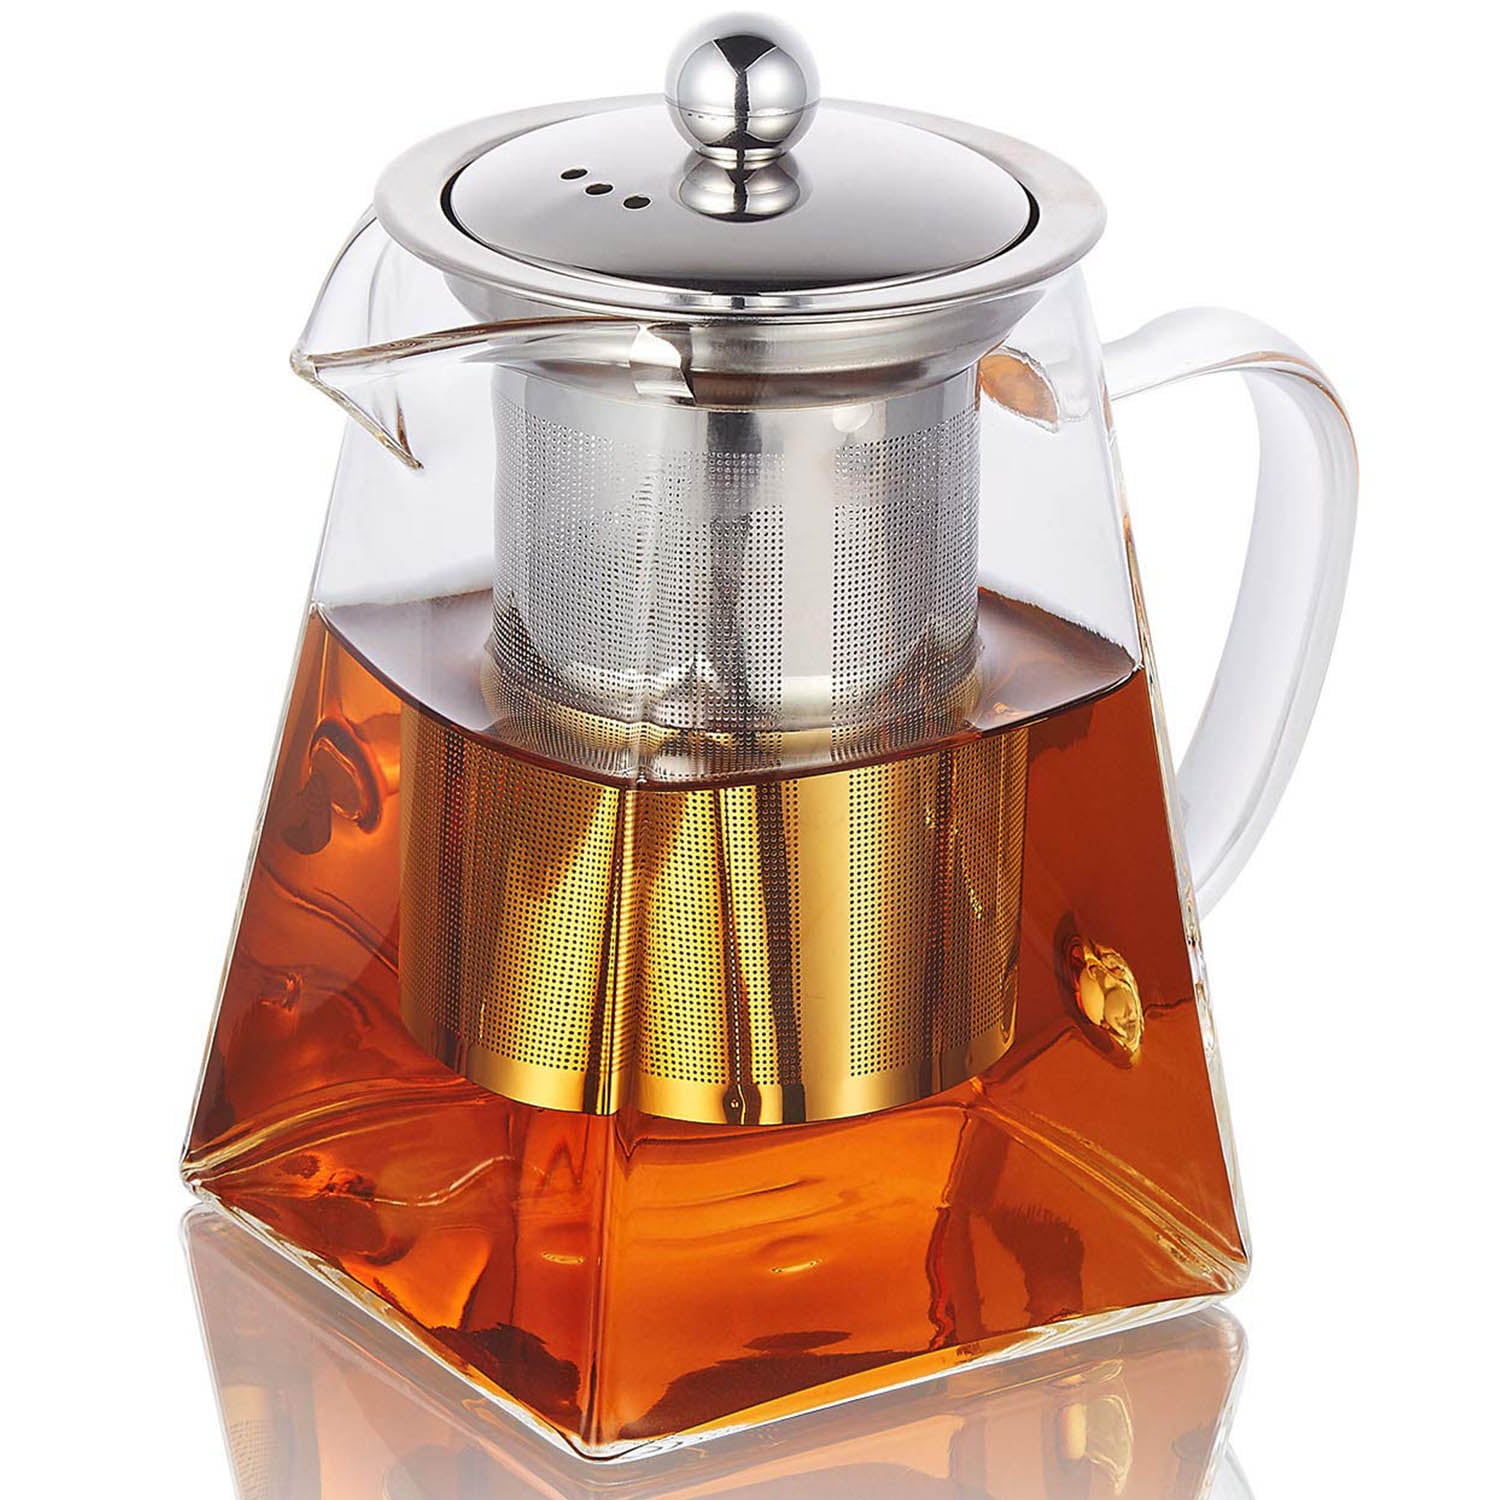 Details about   Stainless Steel Tea Pot With Removable Infuser For Loose Leaf and Tea Bags, 